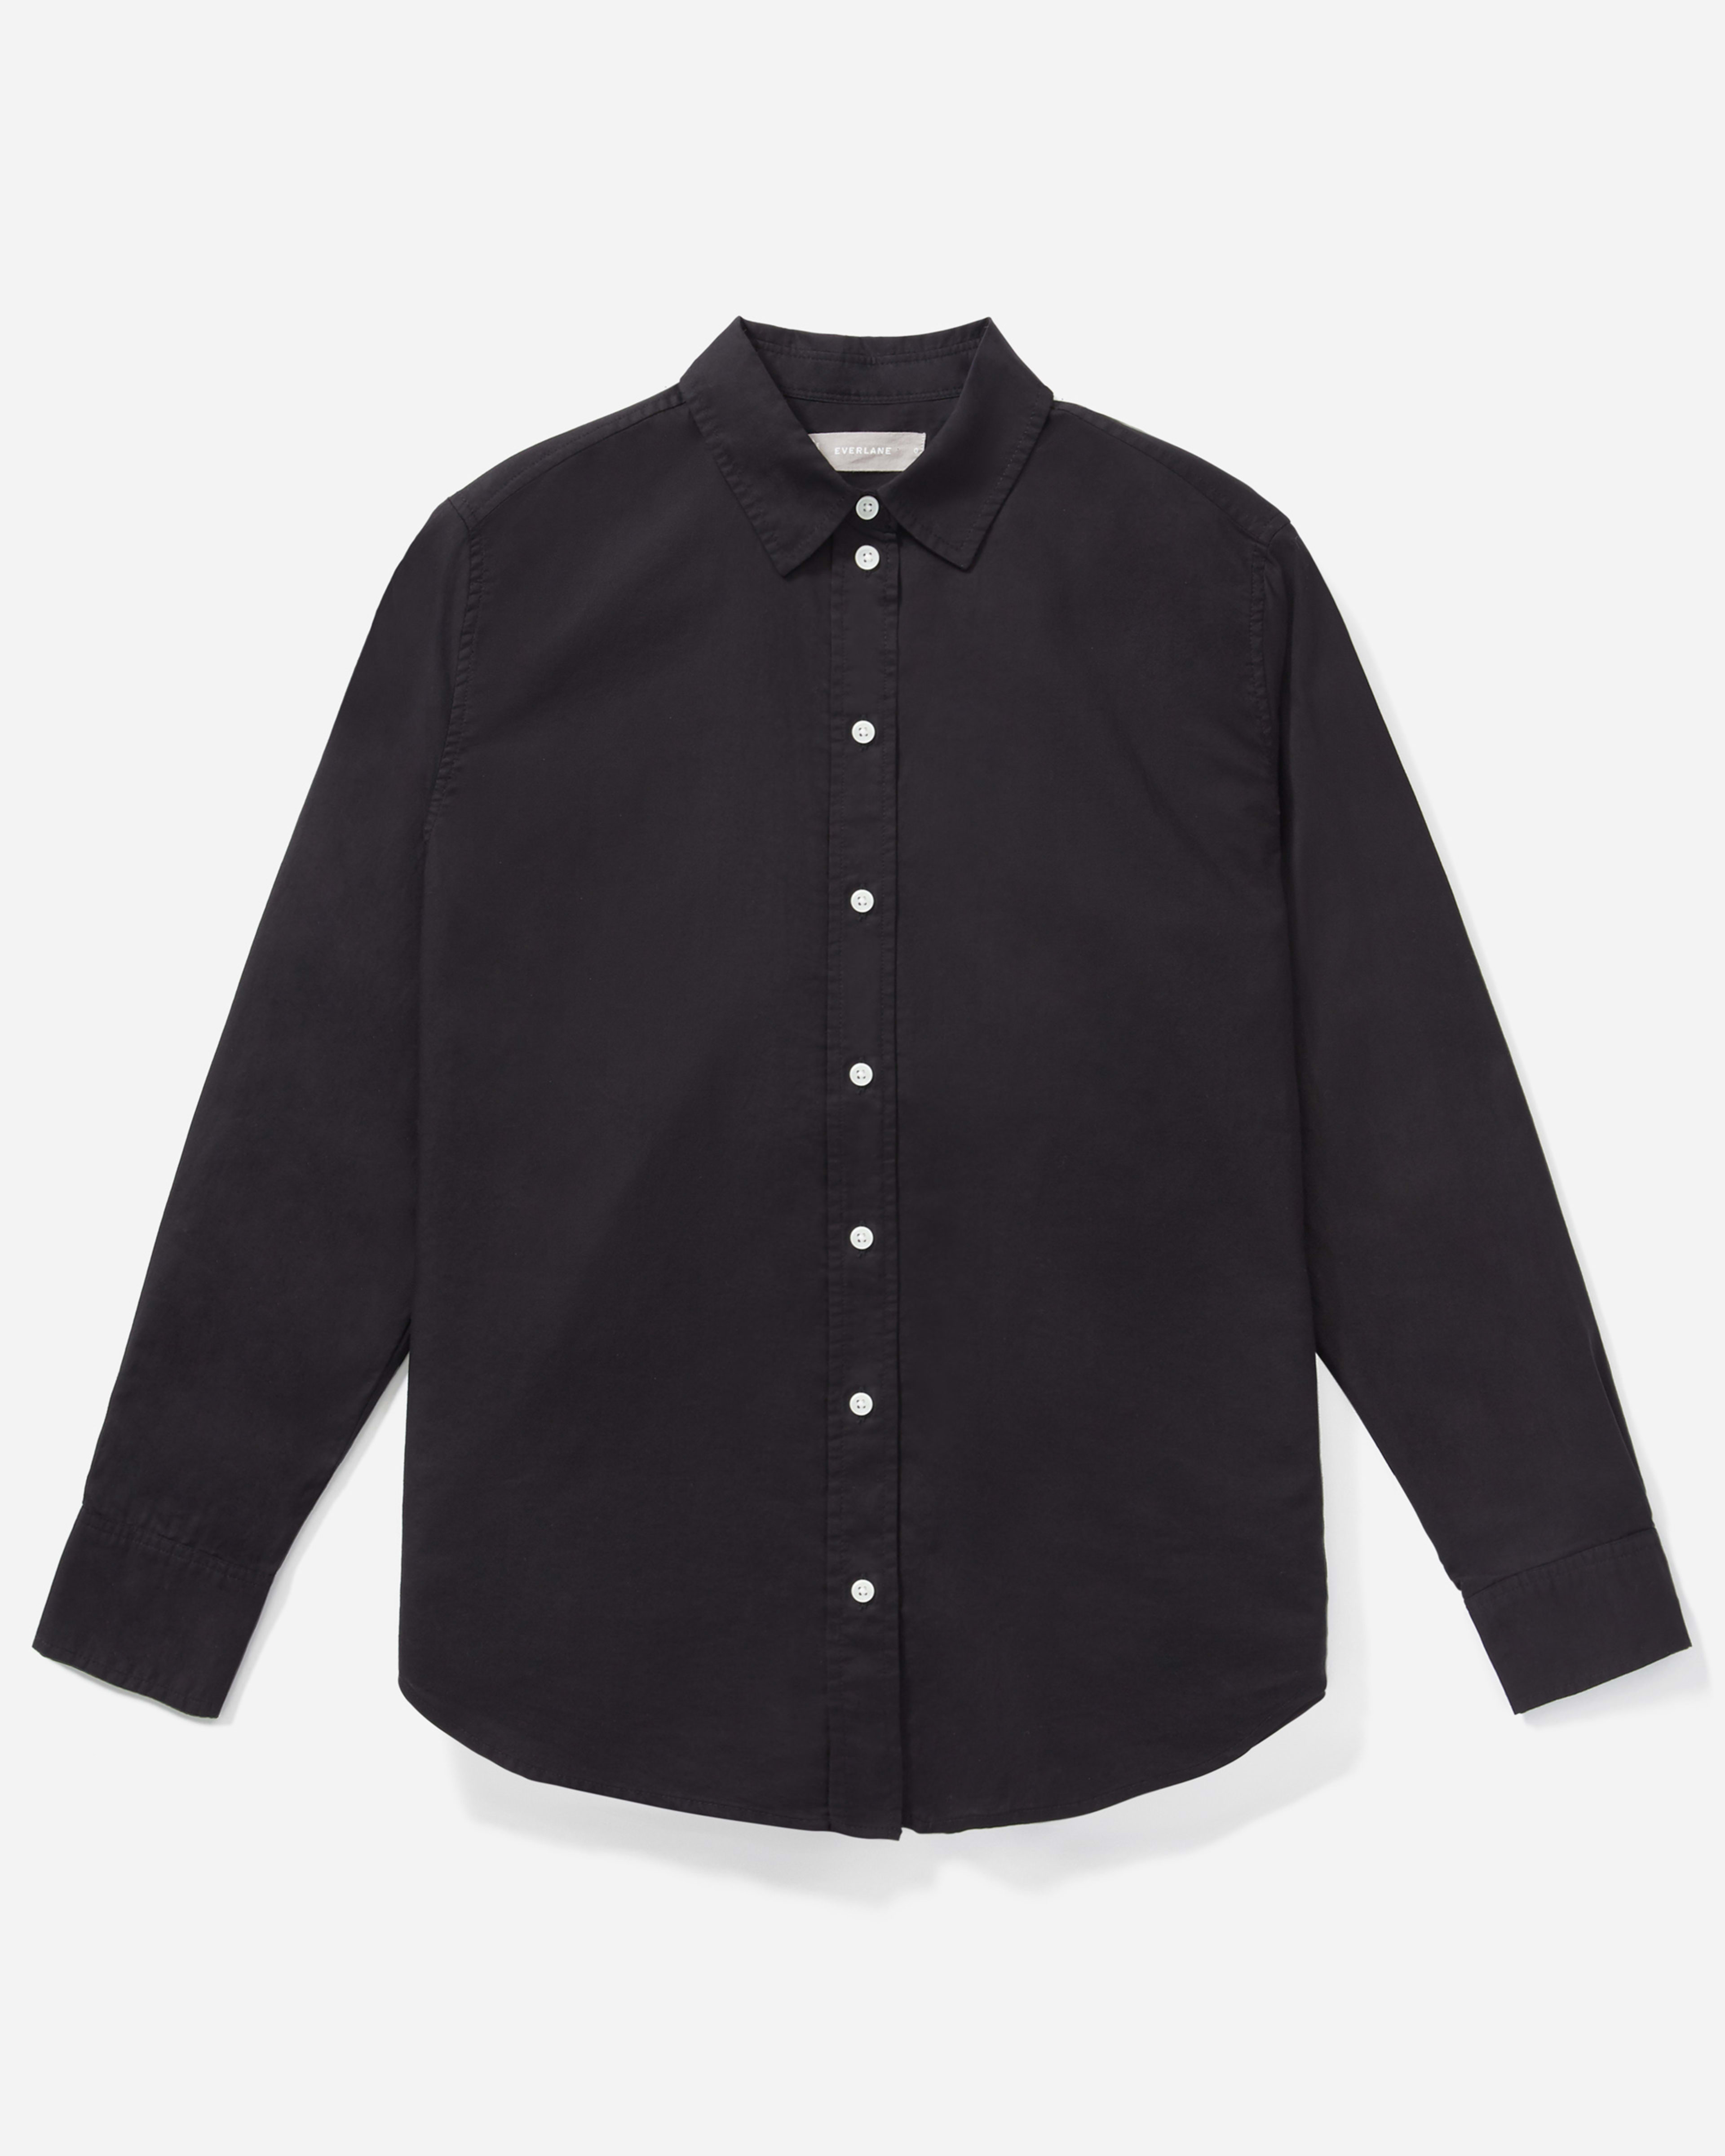 The Silky Cotton Relaxed Shirt Black / White – Everlane